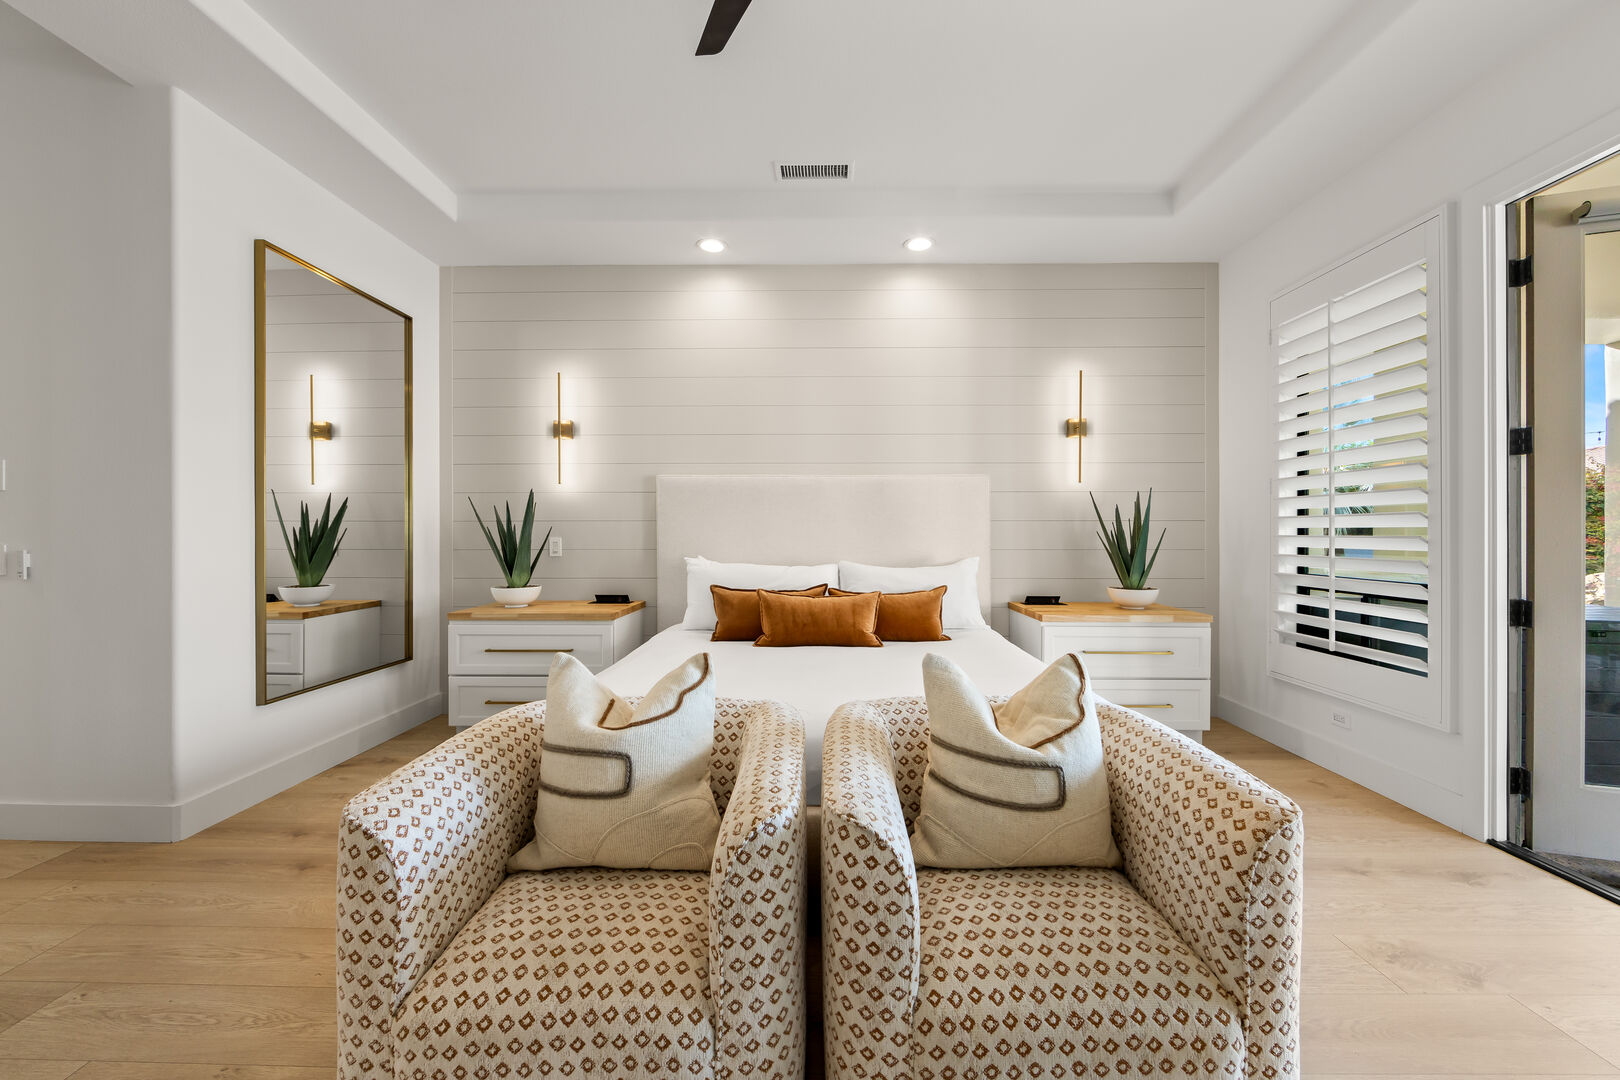 Master Suite 1 is located next to Hallway Bathroom 2 and features a King-sized Bed, 75-inch Samsung 4K Smart television, remote-controlled ceiling fan, and a walk-in closet.